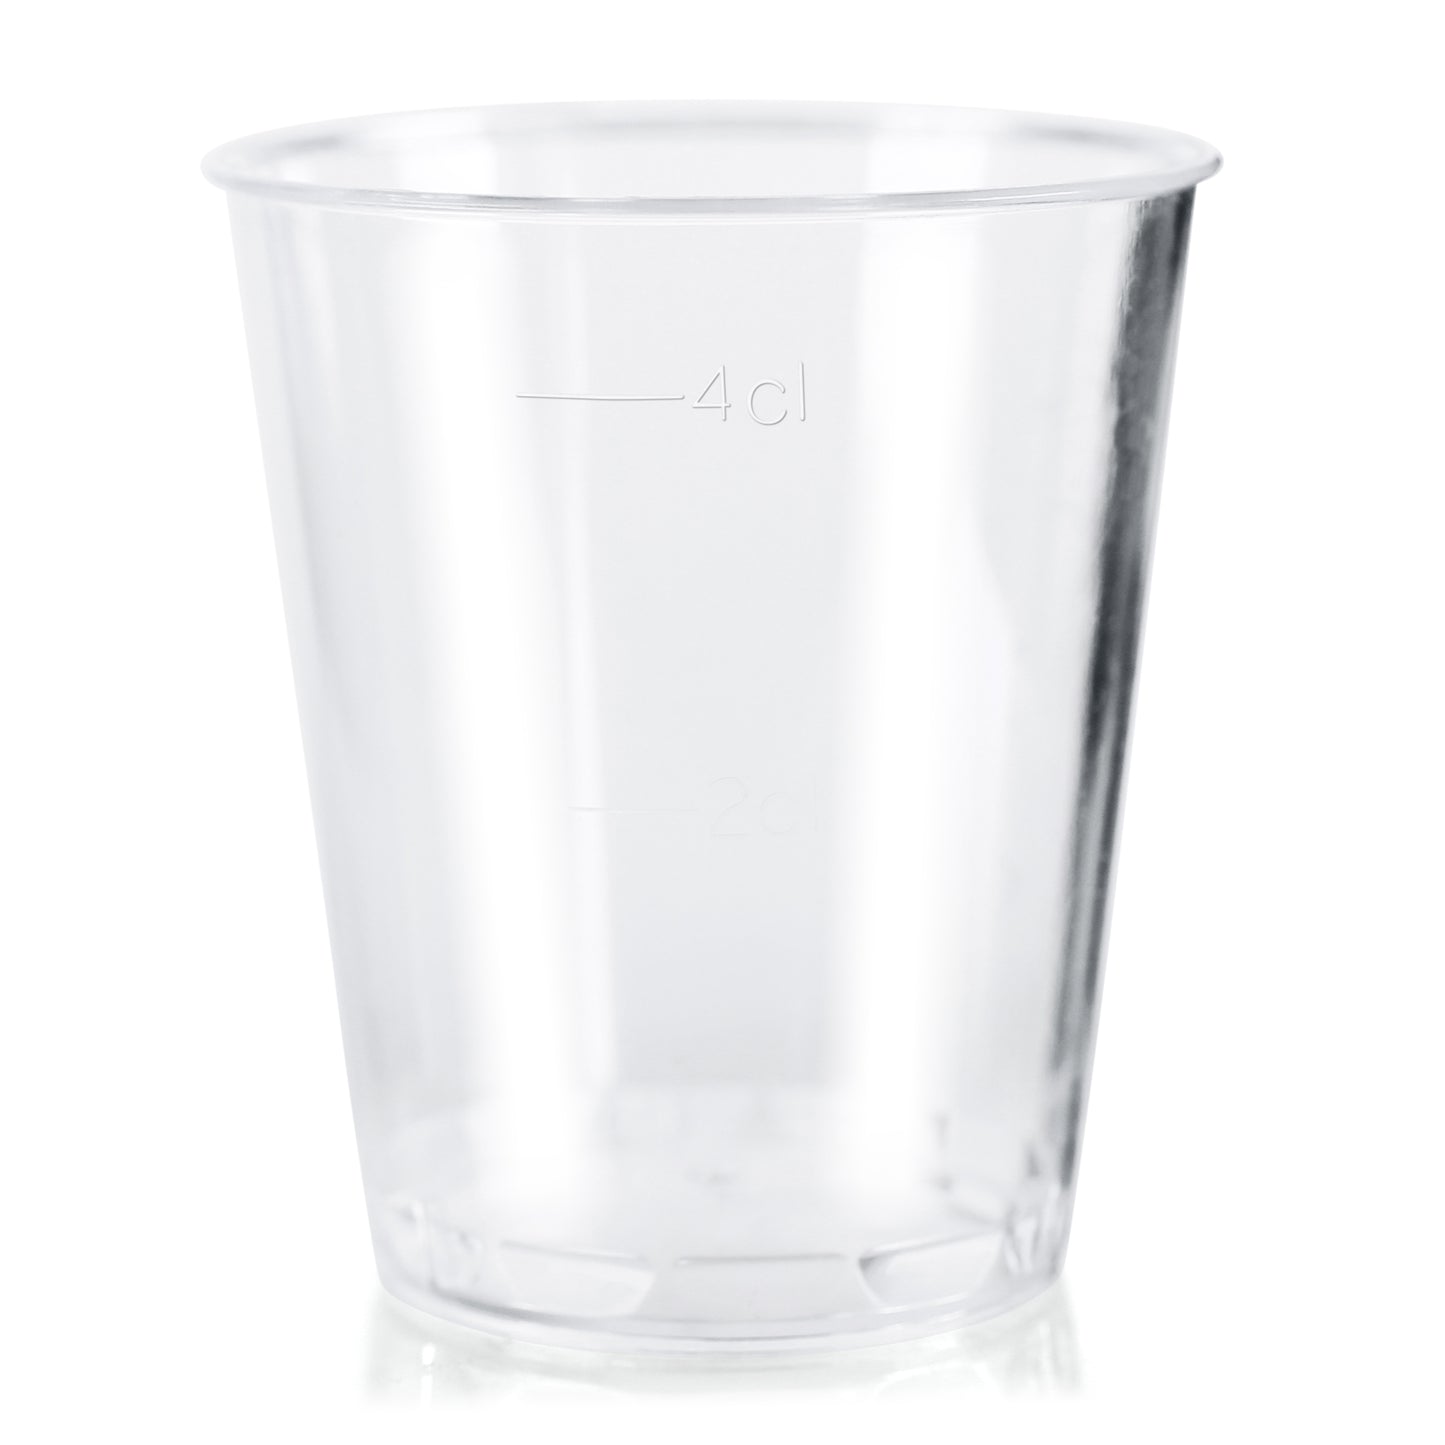 Pack of 1000 x Disposable Clear Shot Glasses 5cl 50ml Stackable Liquor, Spirits, Food Sampling, Parties, Jelly Shots